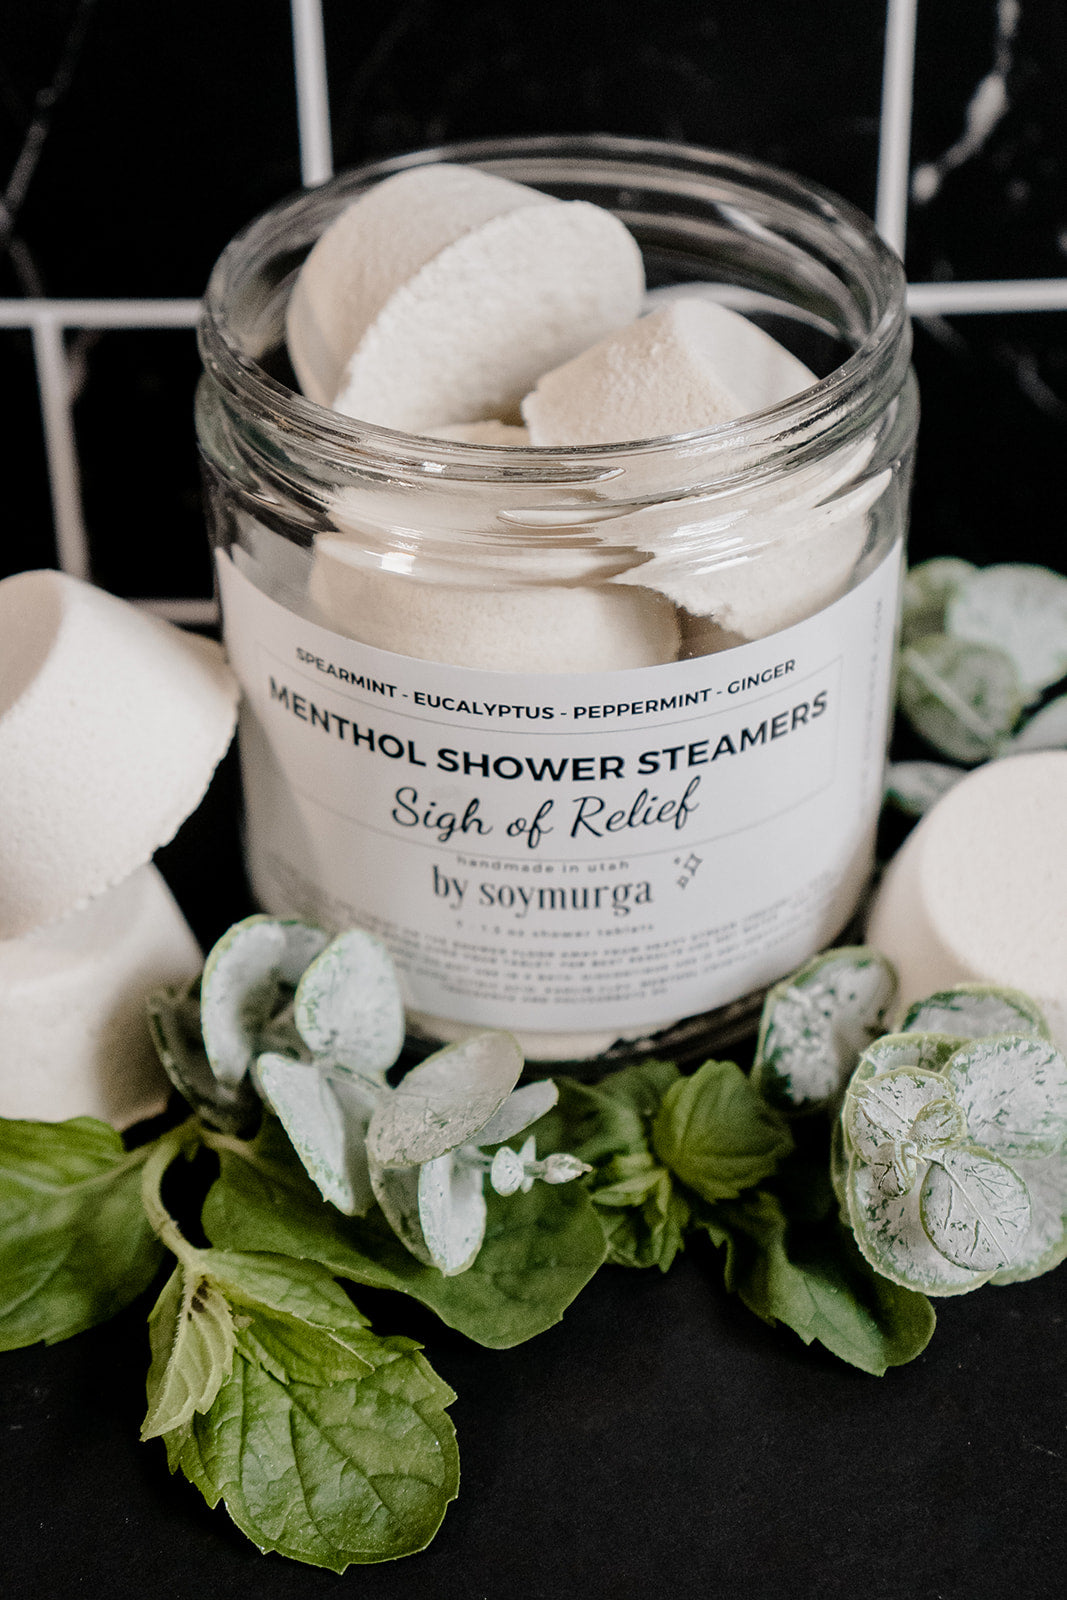 Sigh of Relief - Menthol Shower Steamers